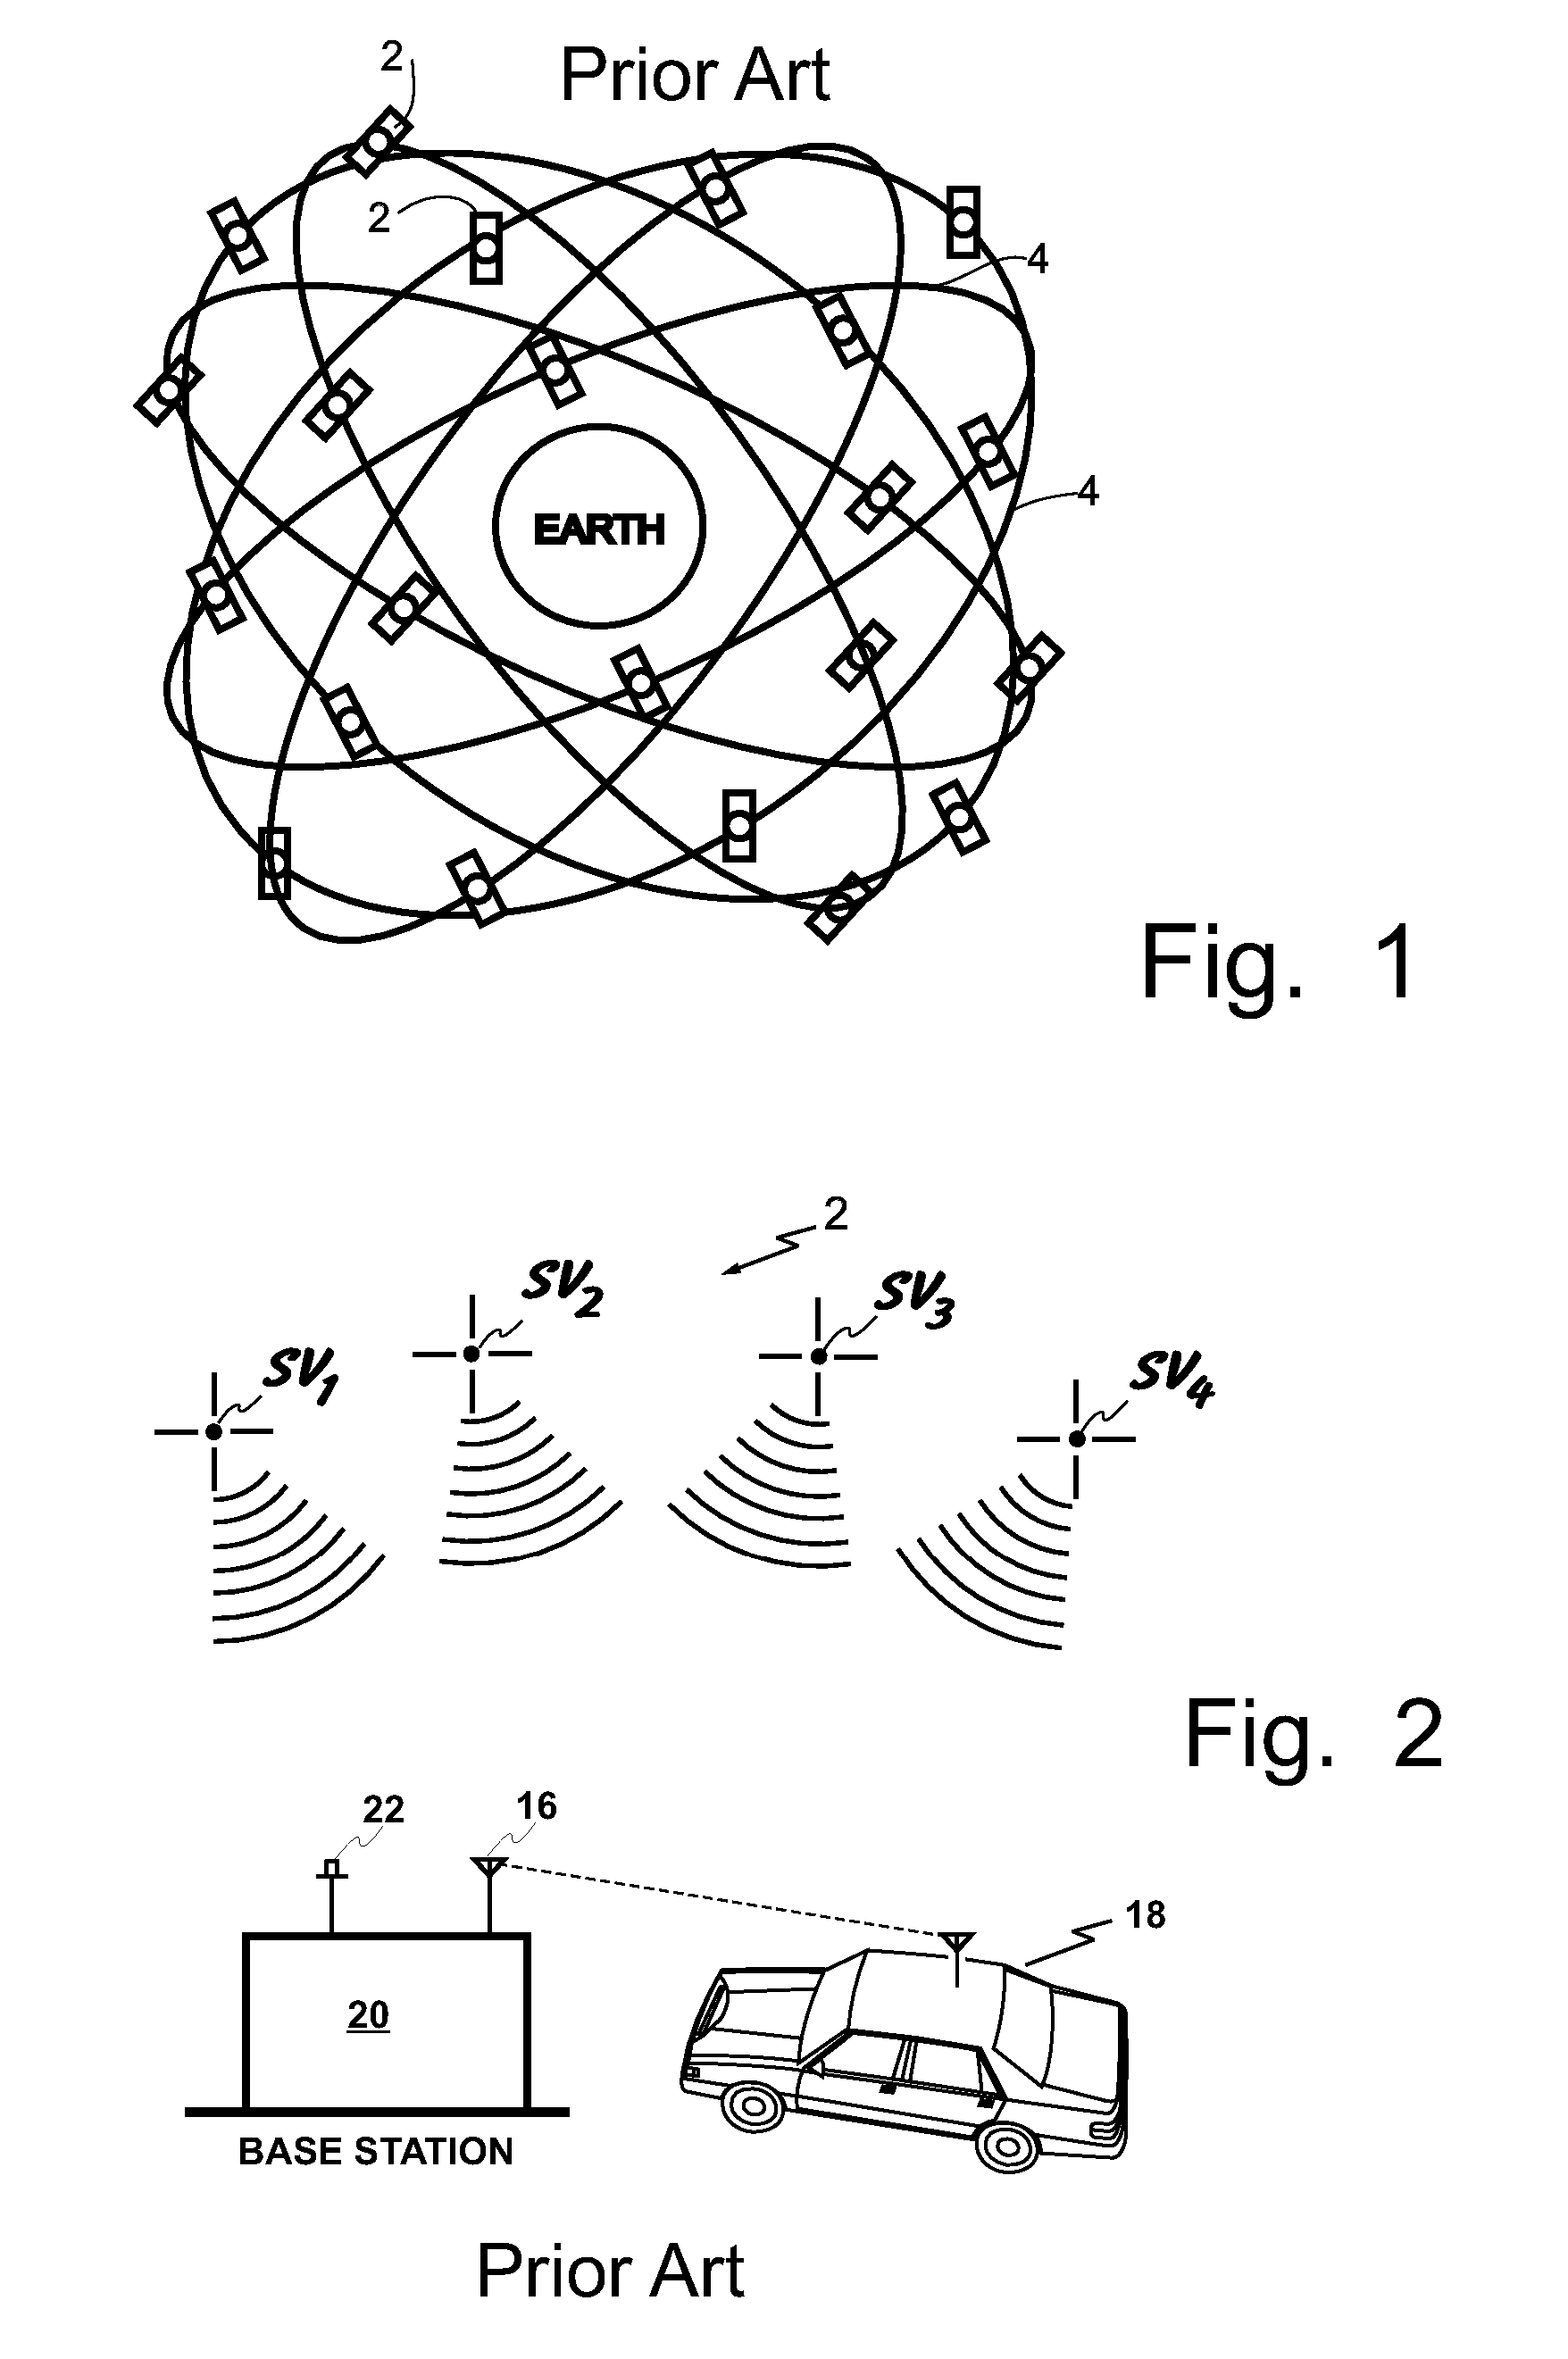 Accident avoidance systems and methods